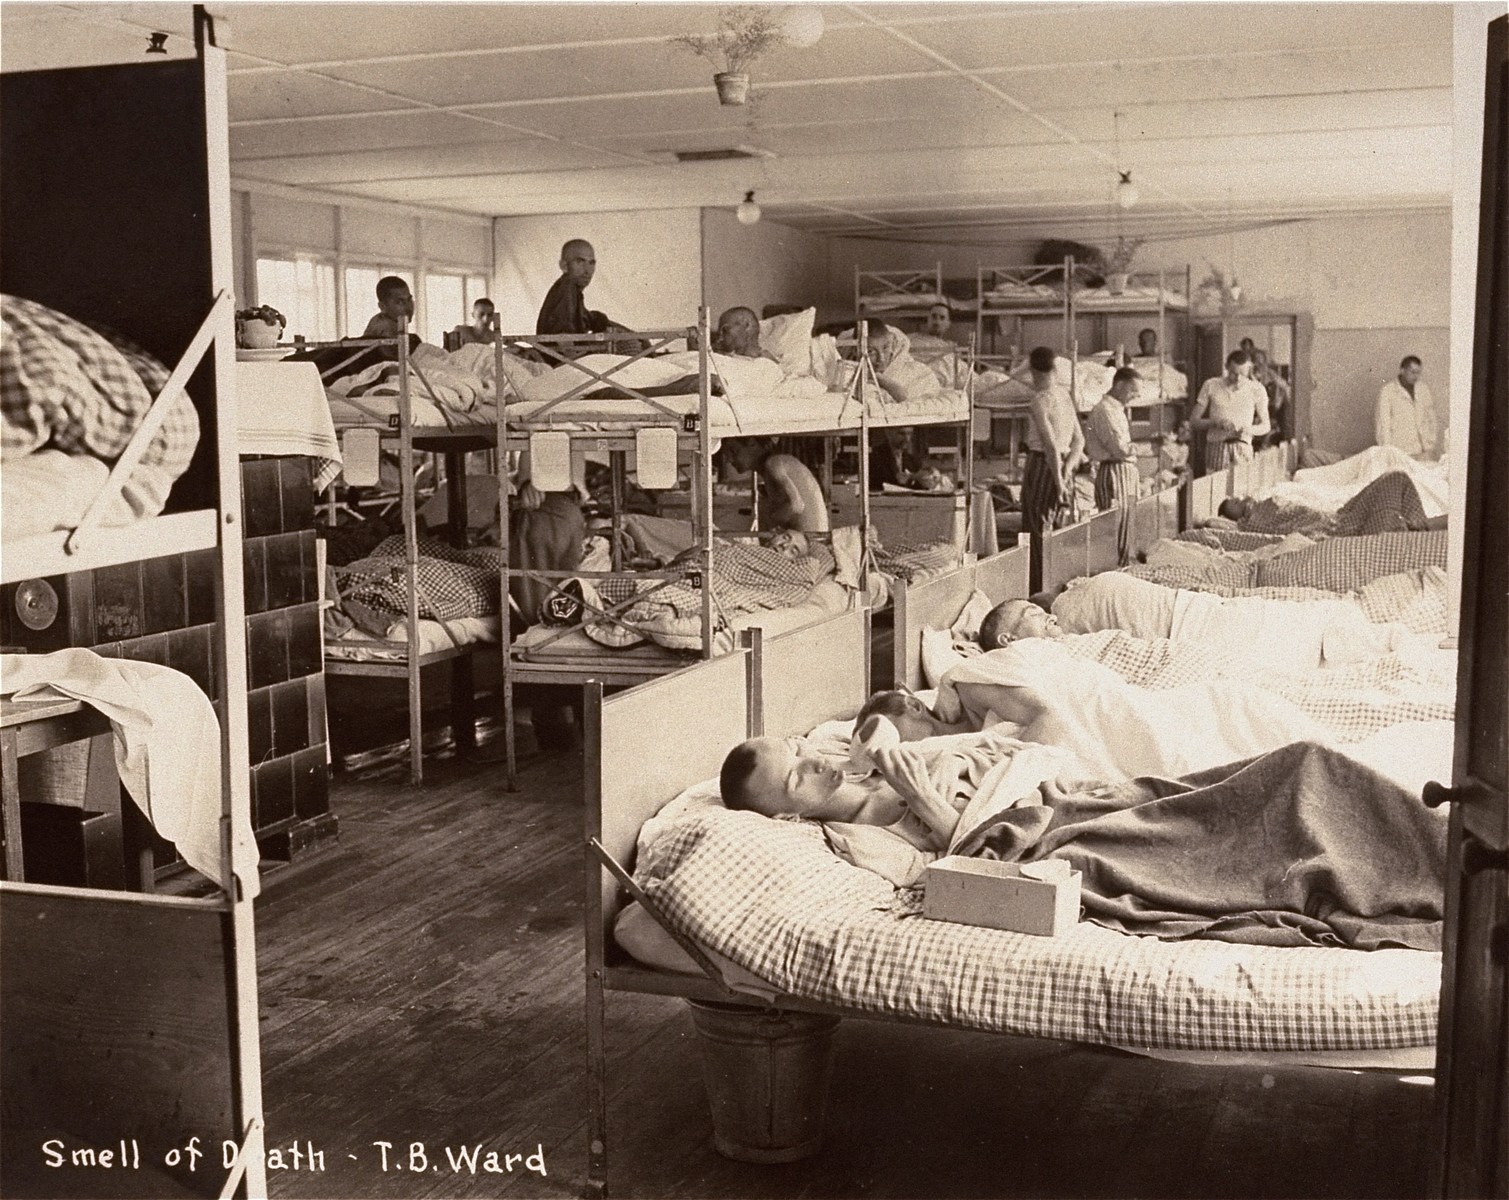 Survivors in a tuberculosis ward set up in Dachau by the U.S. Army.